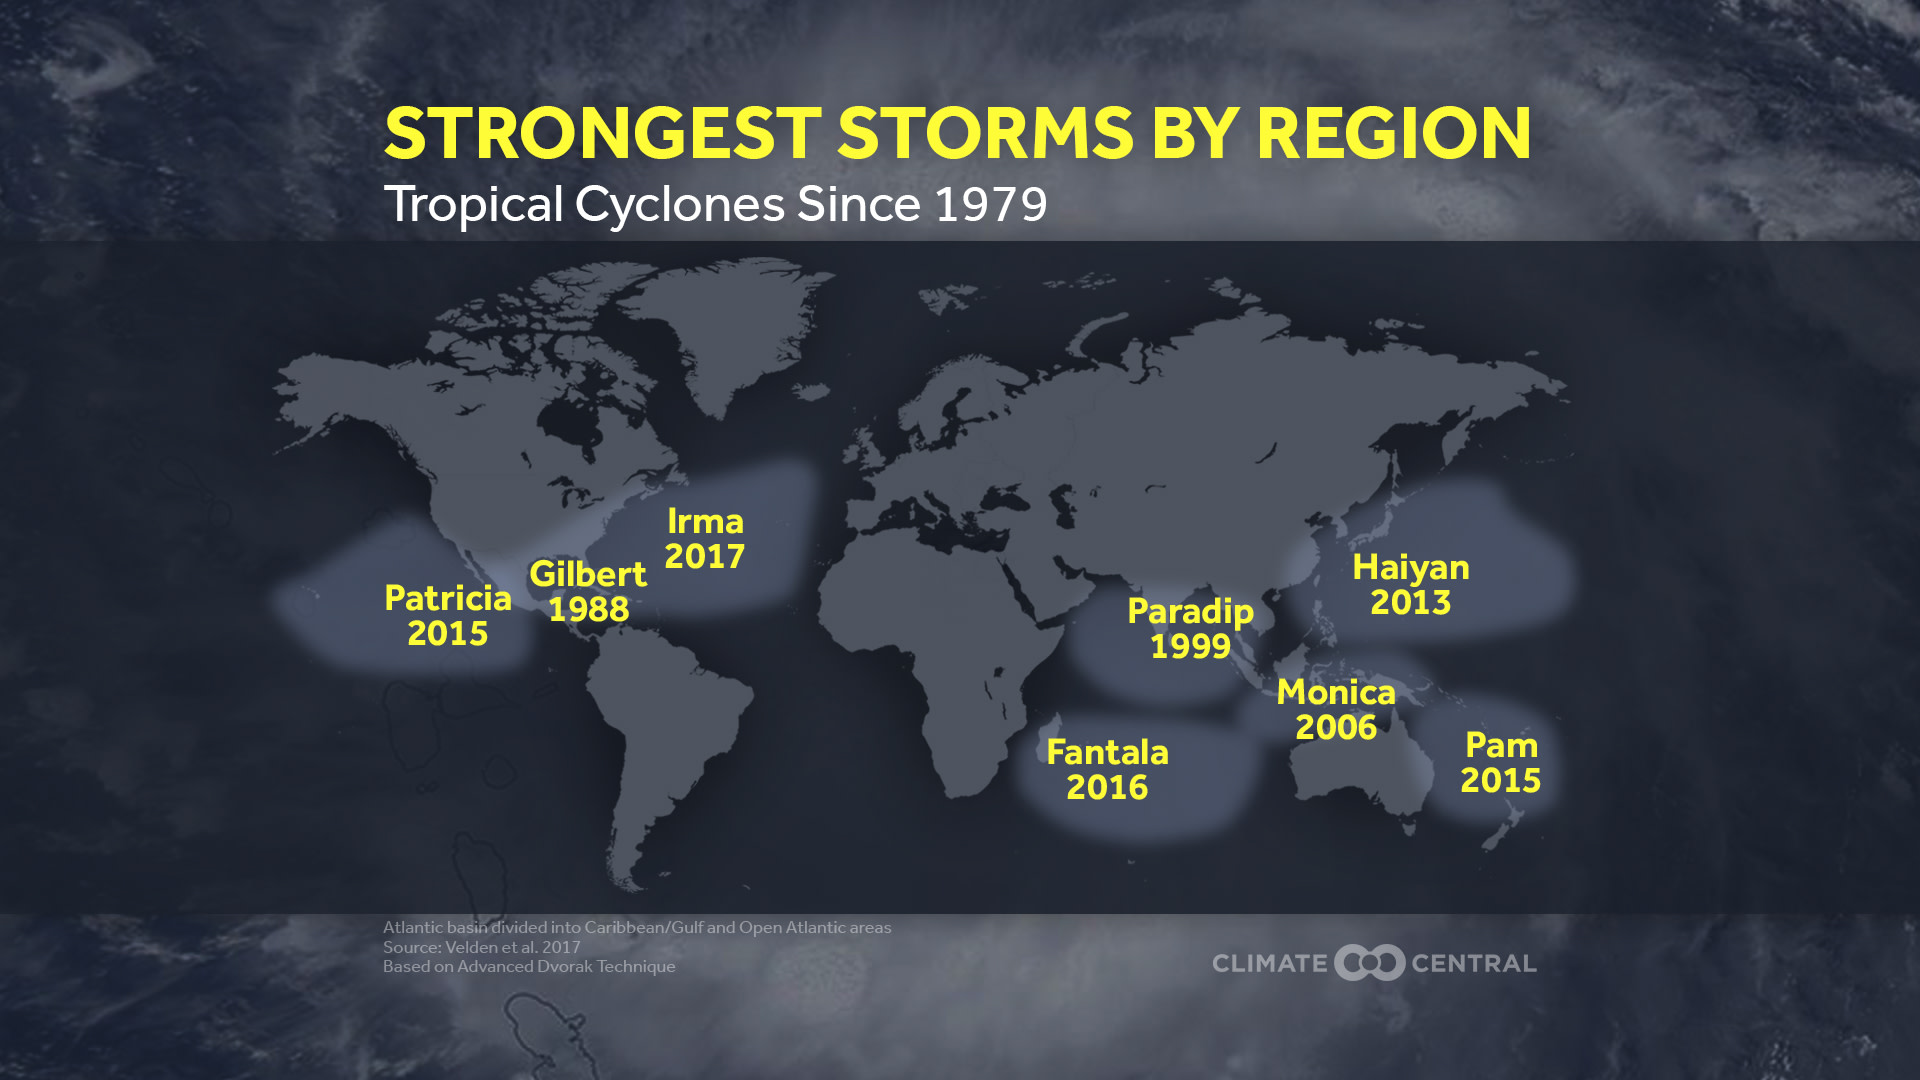 Set 1 - Tropical Cyclone Records & Rainfall Extremes